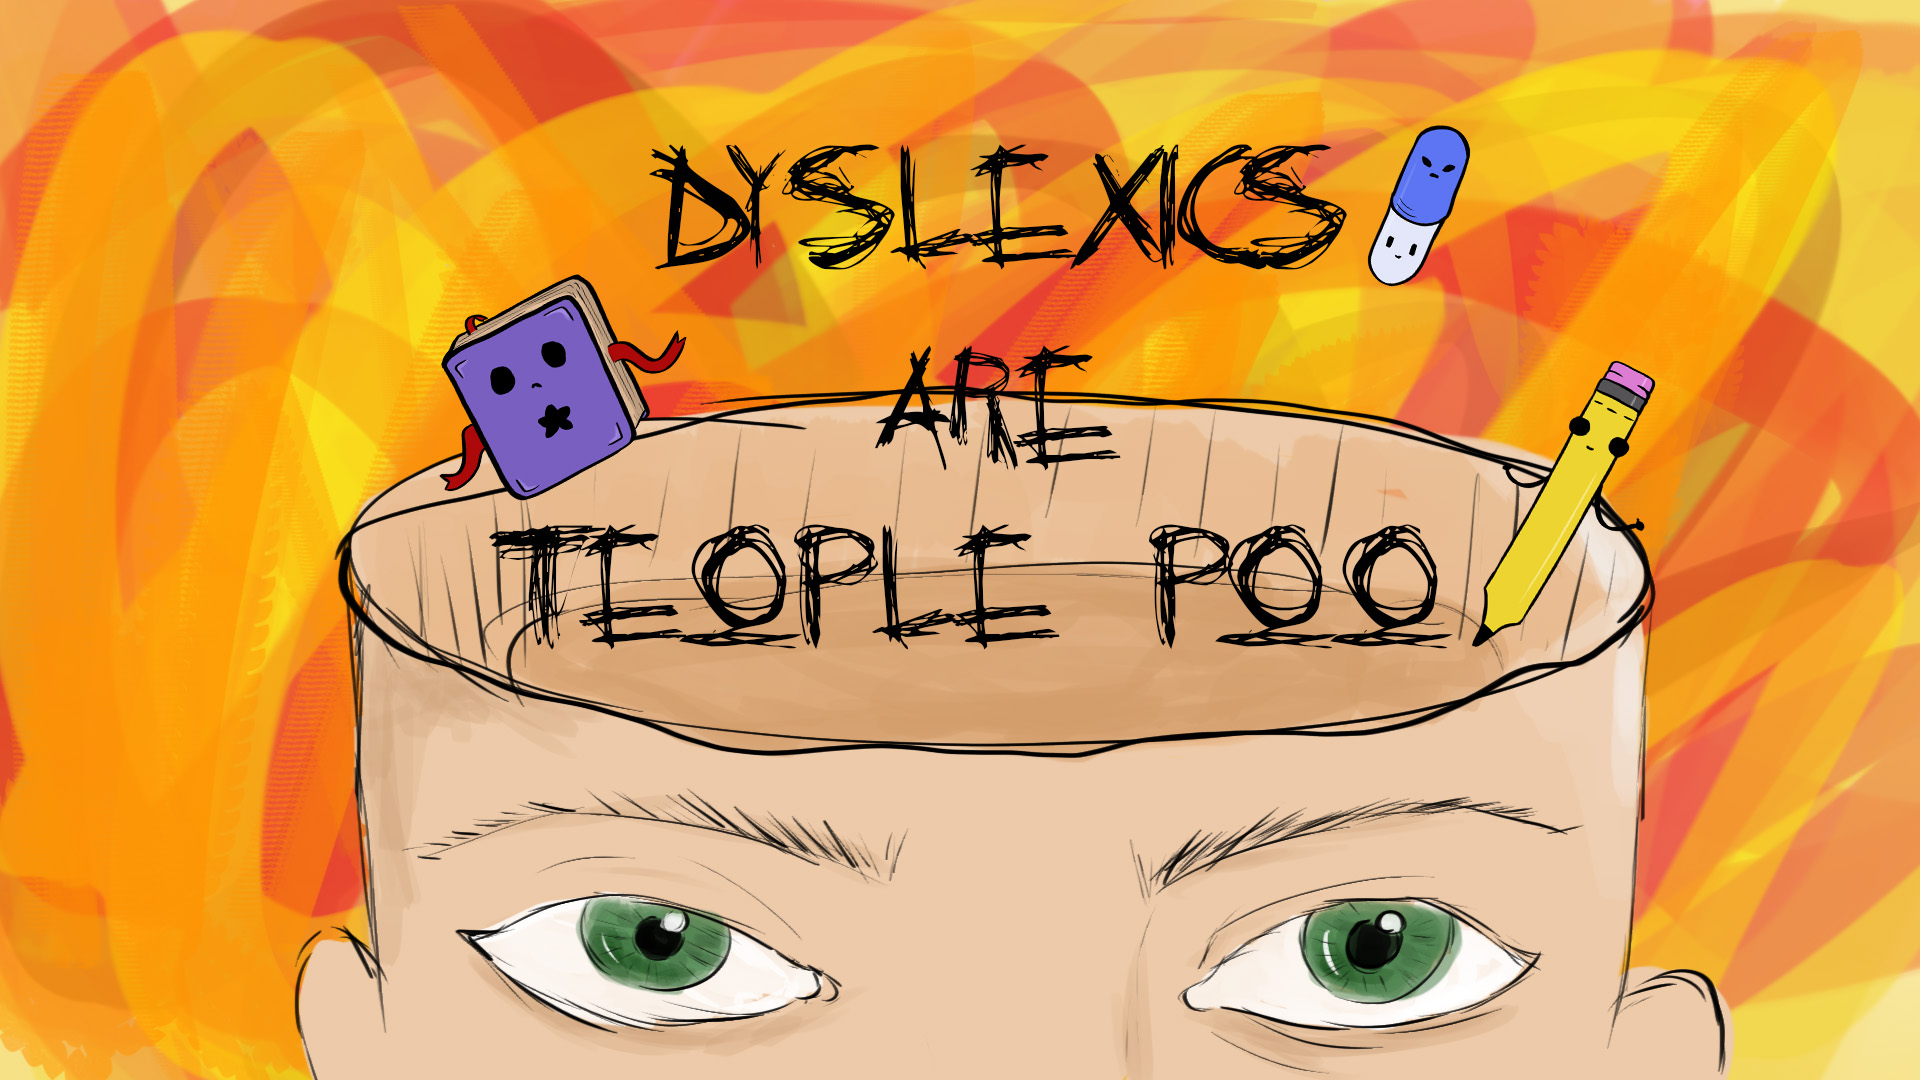 dyslexics are teople poo